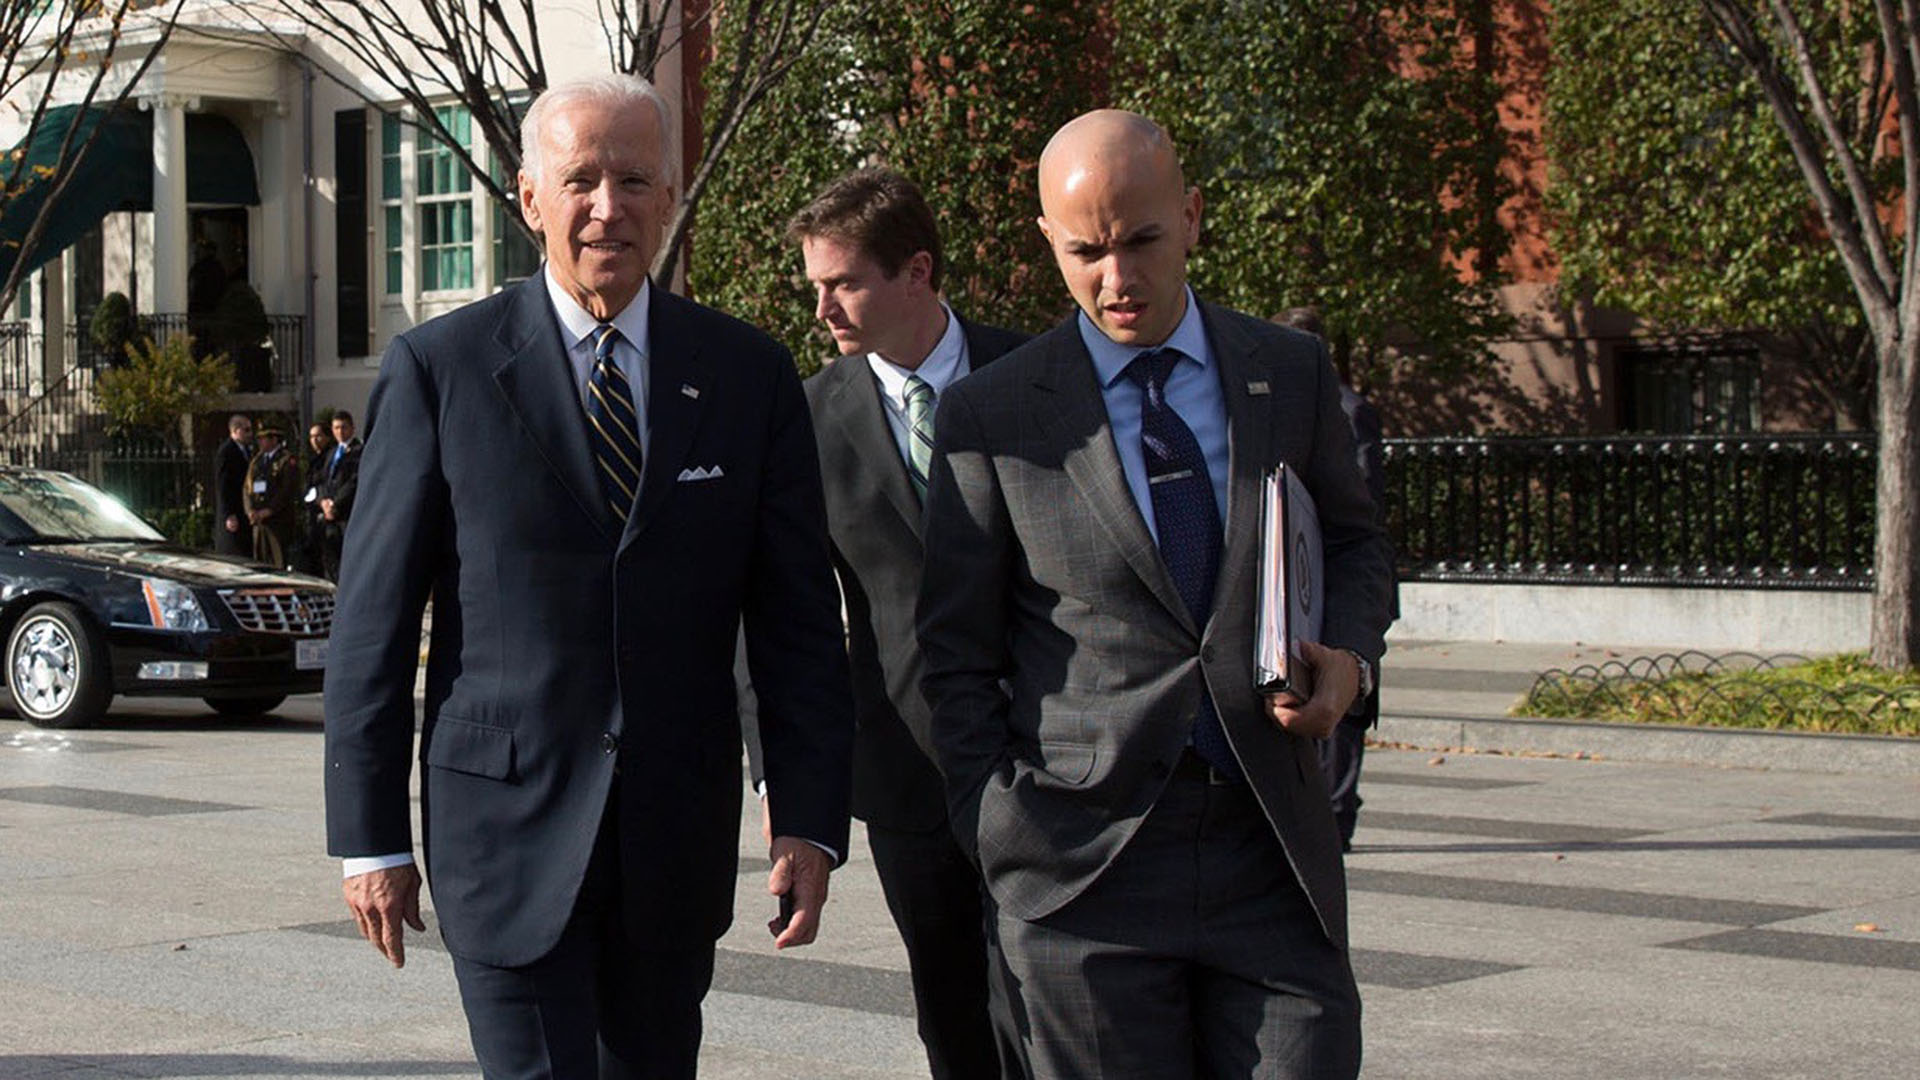 Vice President Joe Biden walks across Pennsylvania and West Executive Avenues, en route to the White House from the Blair House, in Washington, D.C., Nov. 14, 2014. Pictured are Juan Gonzalez, Billy Davis, Michael Schrum. (Official White House Photo by David Lienemann) 